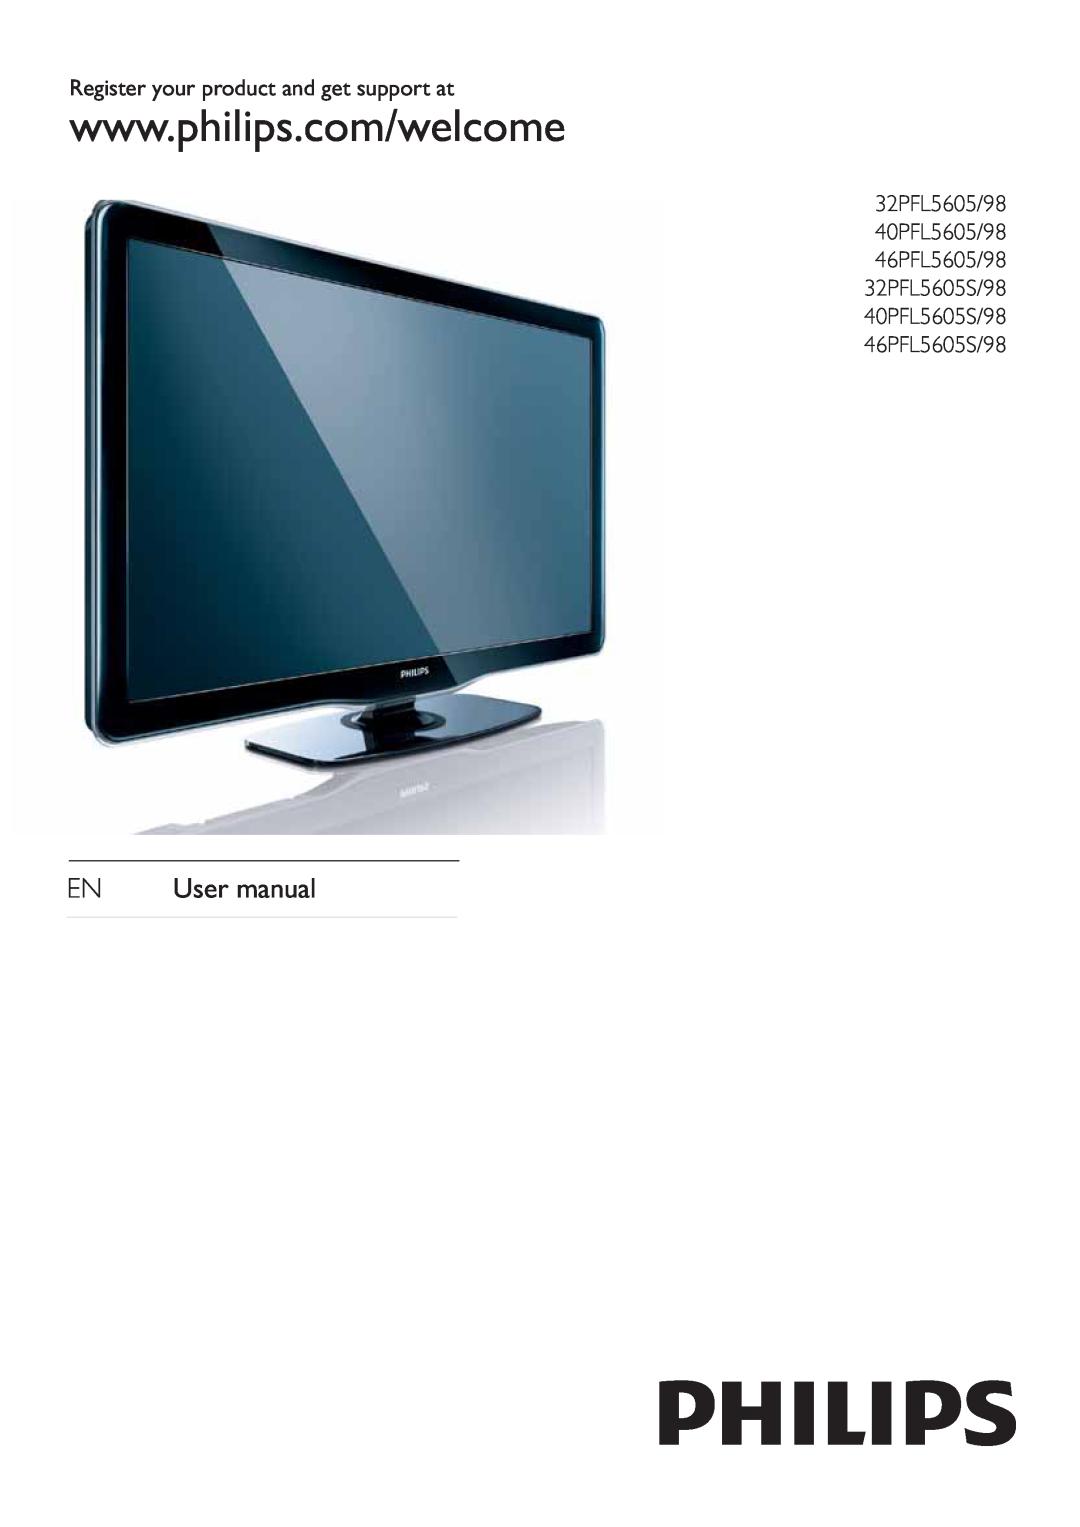 Philips 40PFL5605/98, 40PFL5605S/98 user manual EN User manual, Register your product and get support at, 46PFL5605S/98 